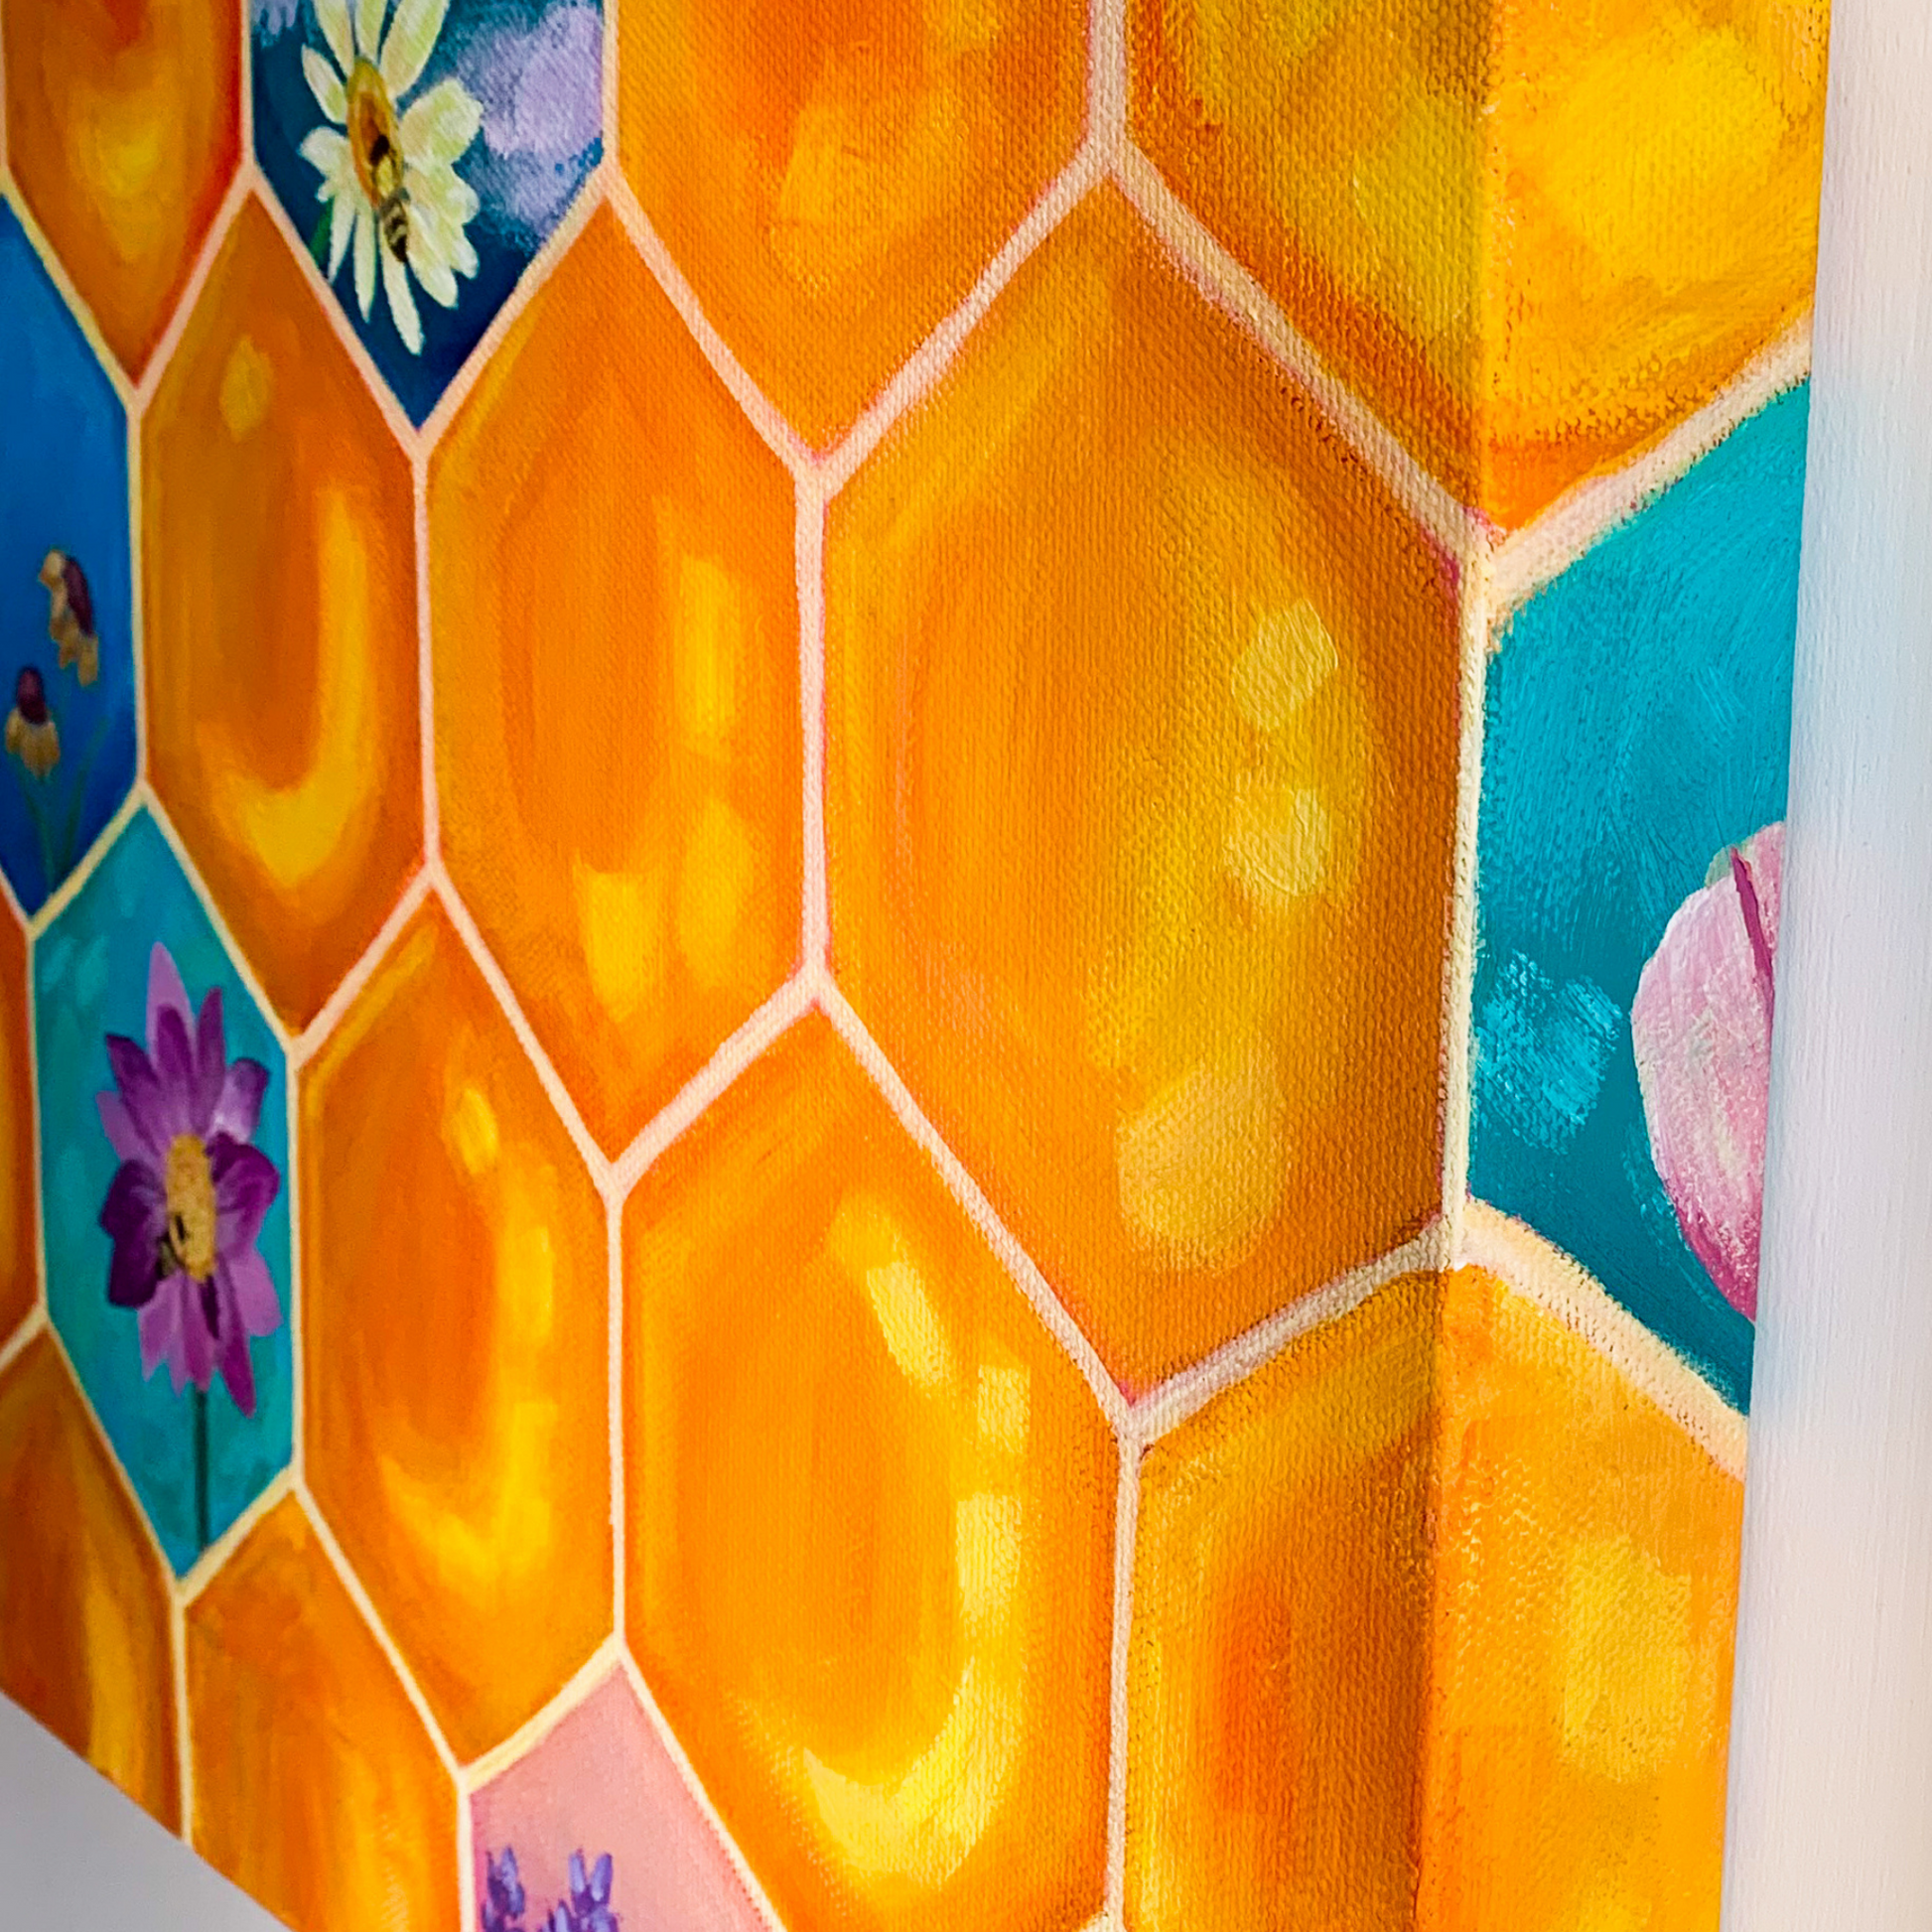 The side of the honeycomb painting showing another honeycomb that's blue with a tulip blooming.